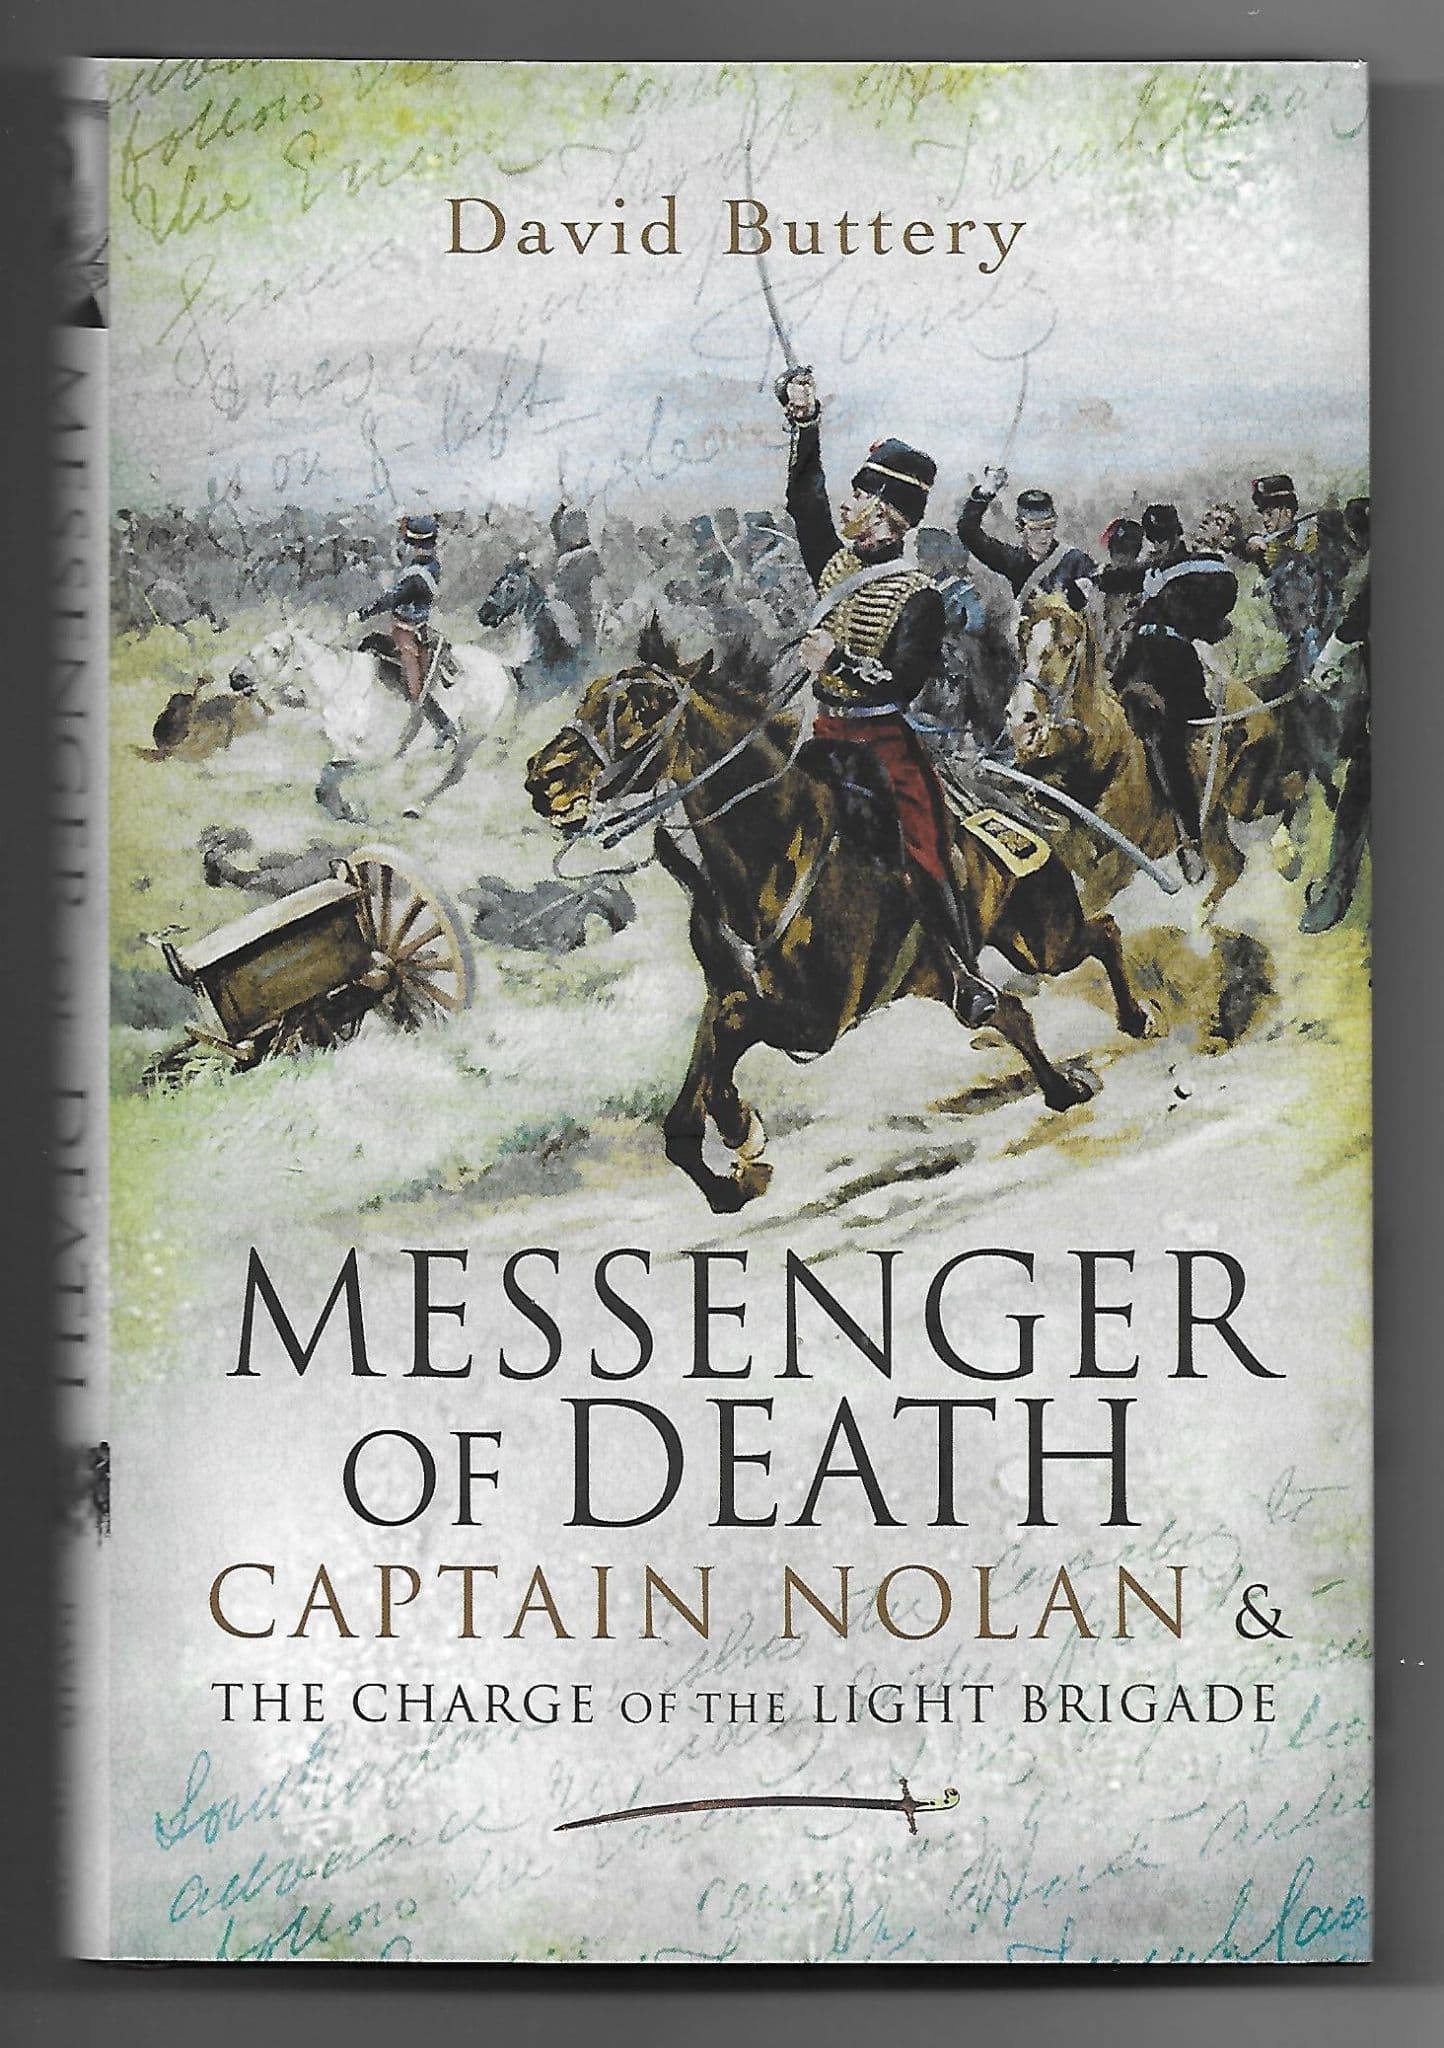 Messenger of Death, Captain Nolan & The Charge of the Light Brigade